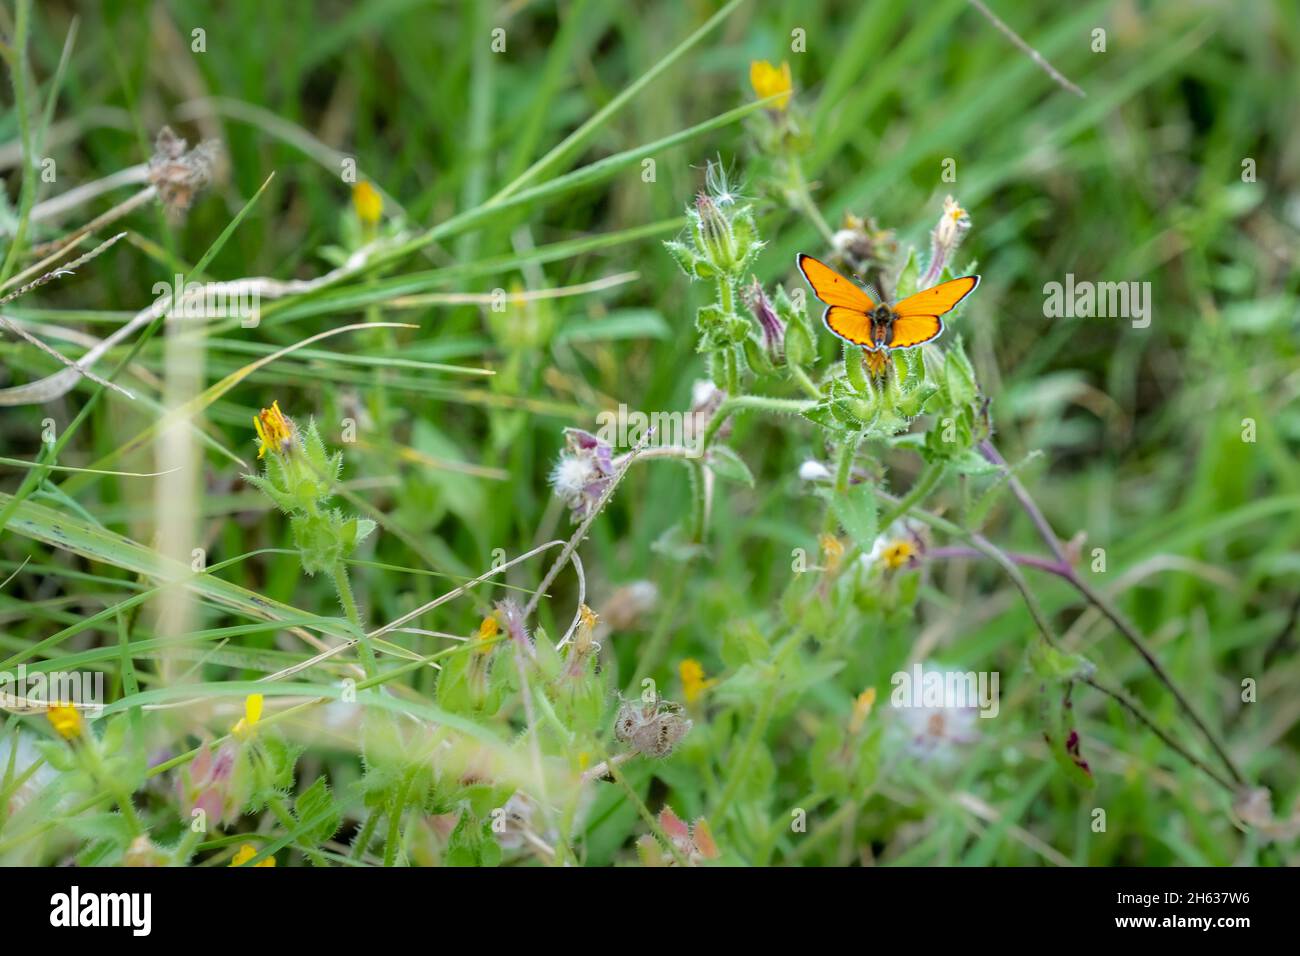 Soft focus of large copper butterfly on a plant at a meadow Stock Photo